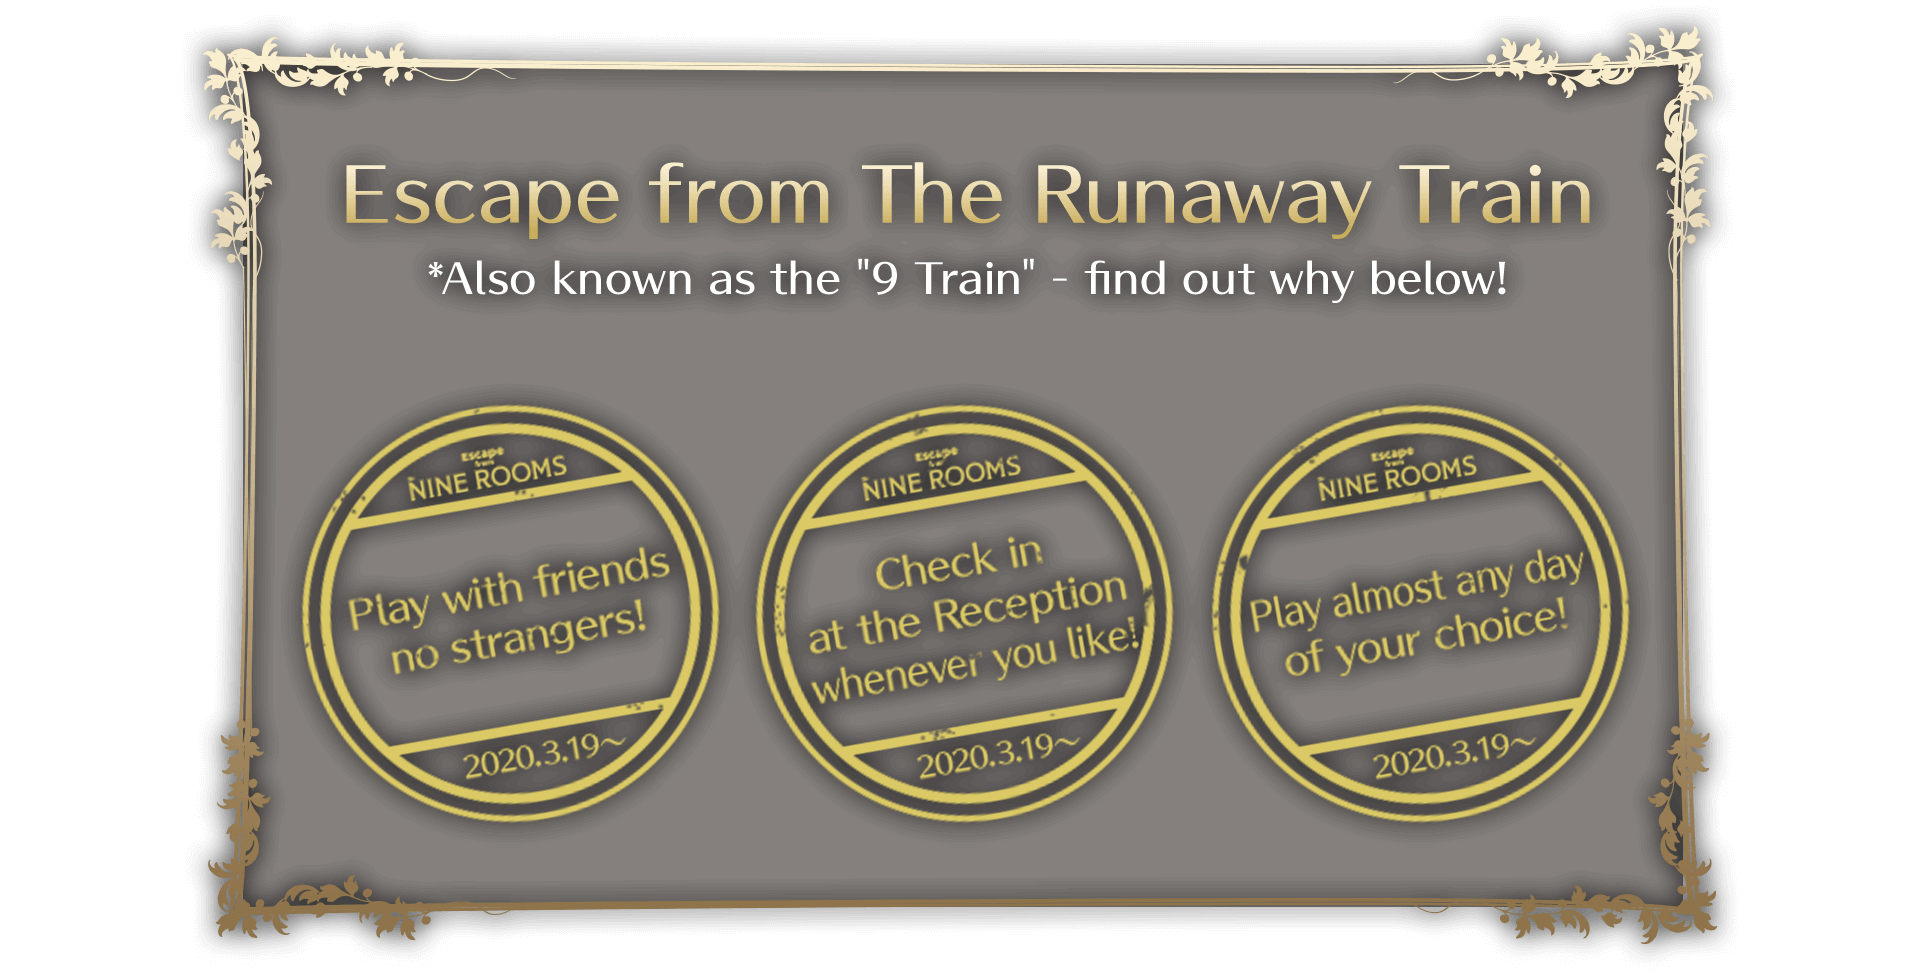 Escape from The Runaway Train *Also known as the "9 Train" - find out why below! Play with friends - no strangers! Check in at the Reception whenever you like! Play almost any day of your choice!